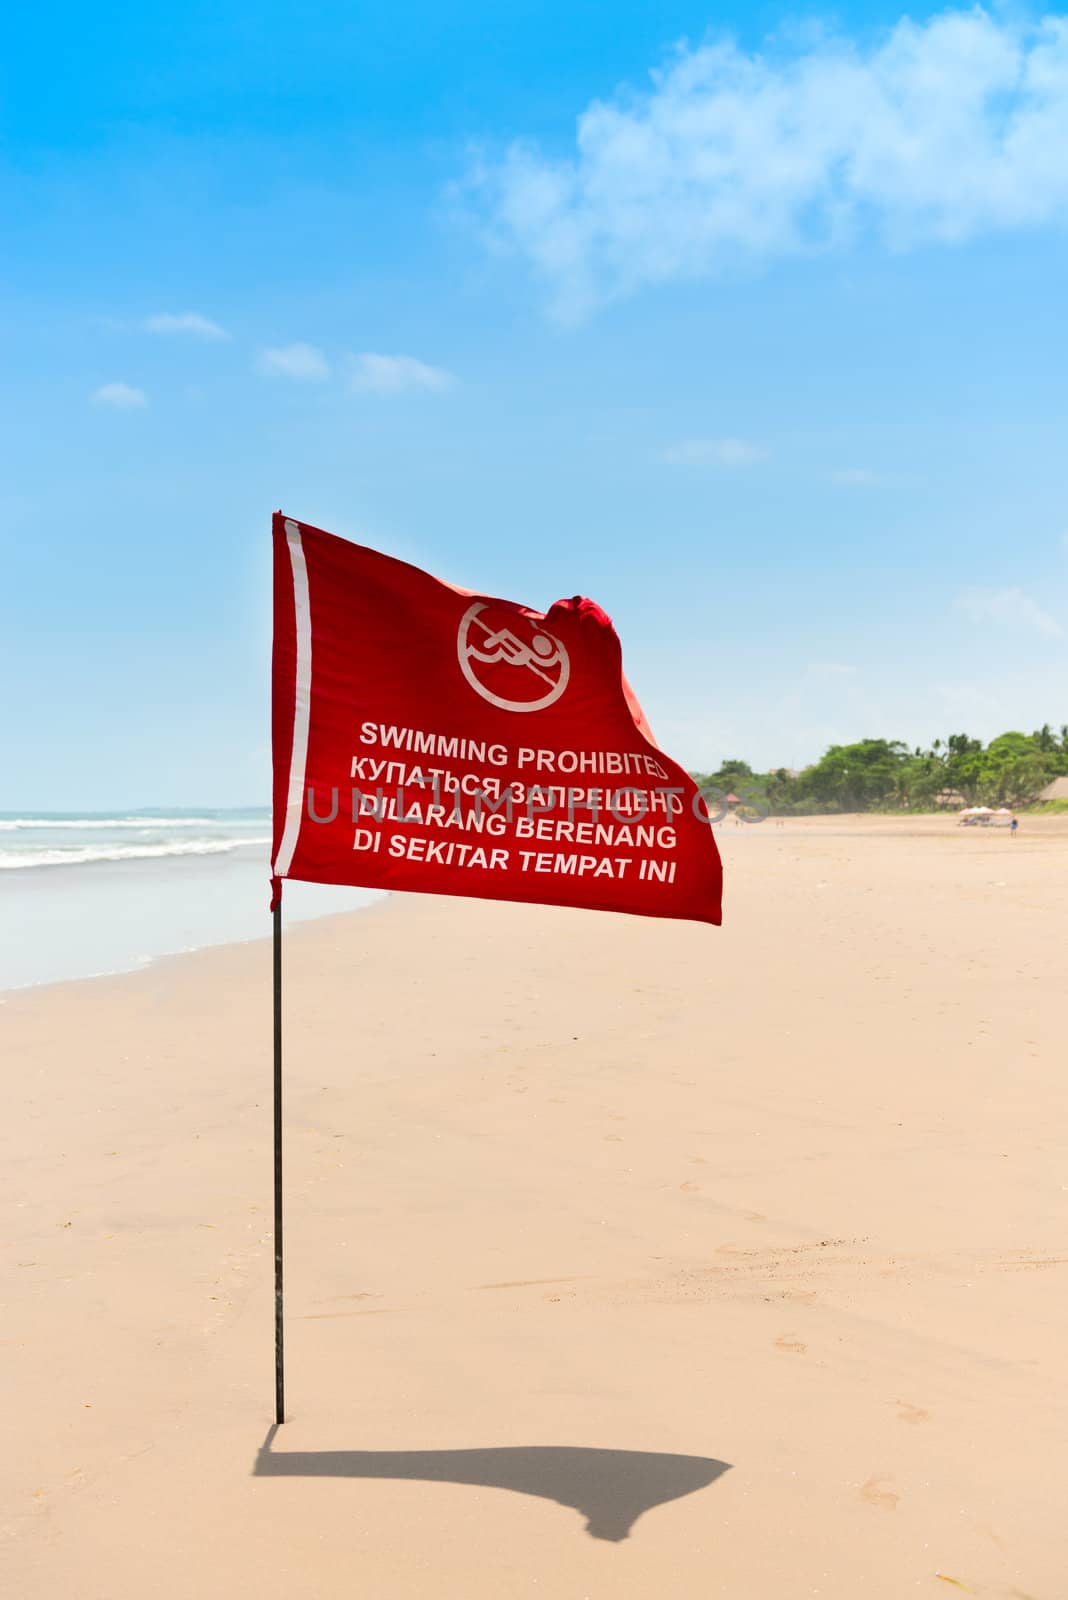 Season of storms. Red flag on the sand beach with no Swimming sign .